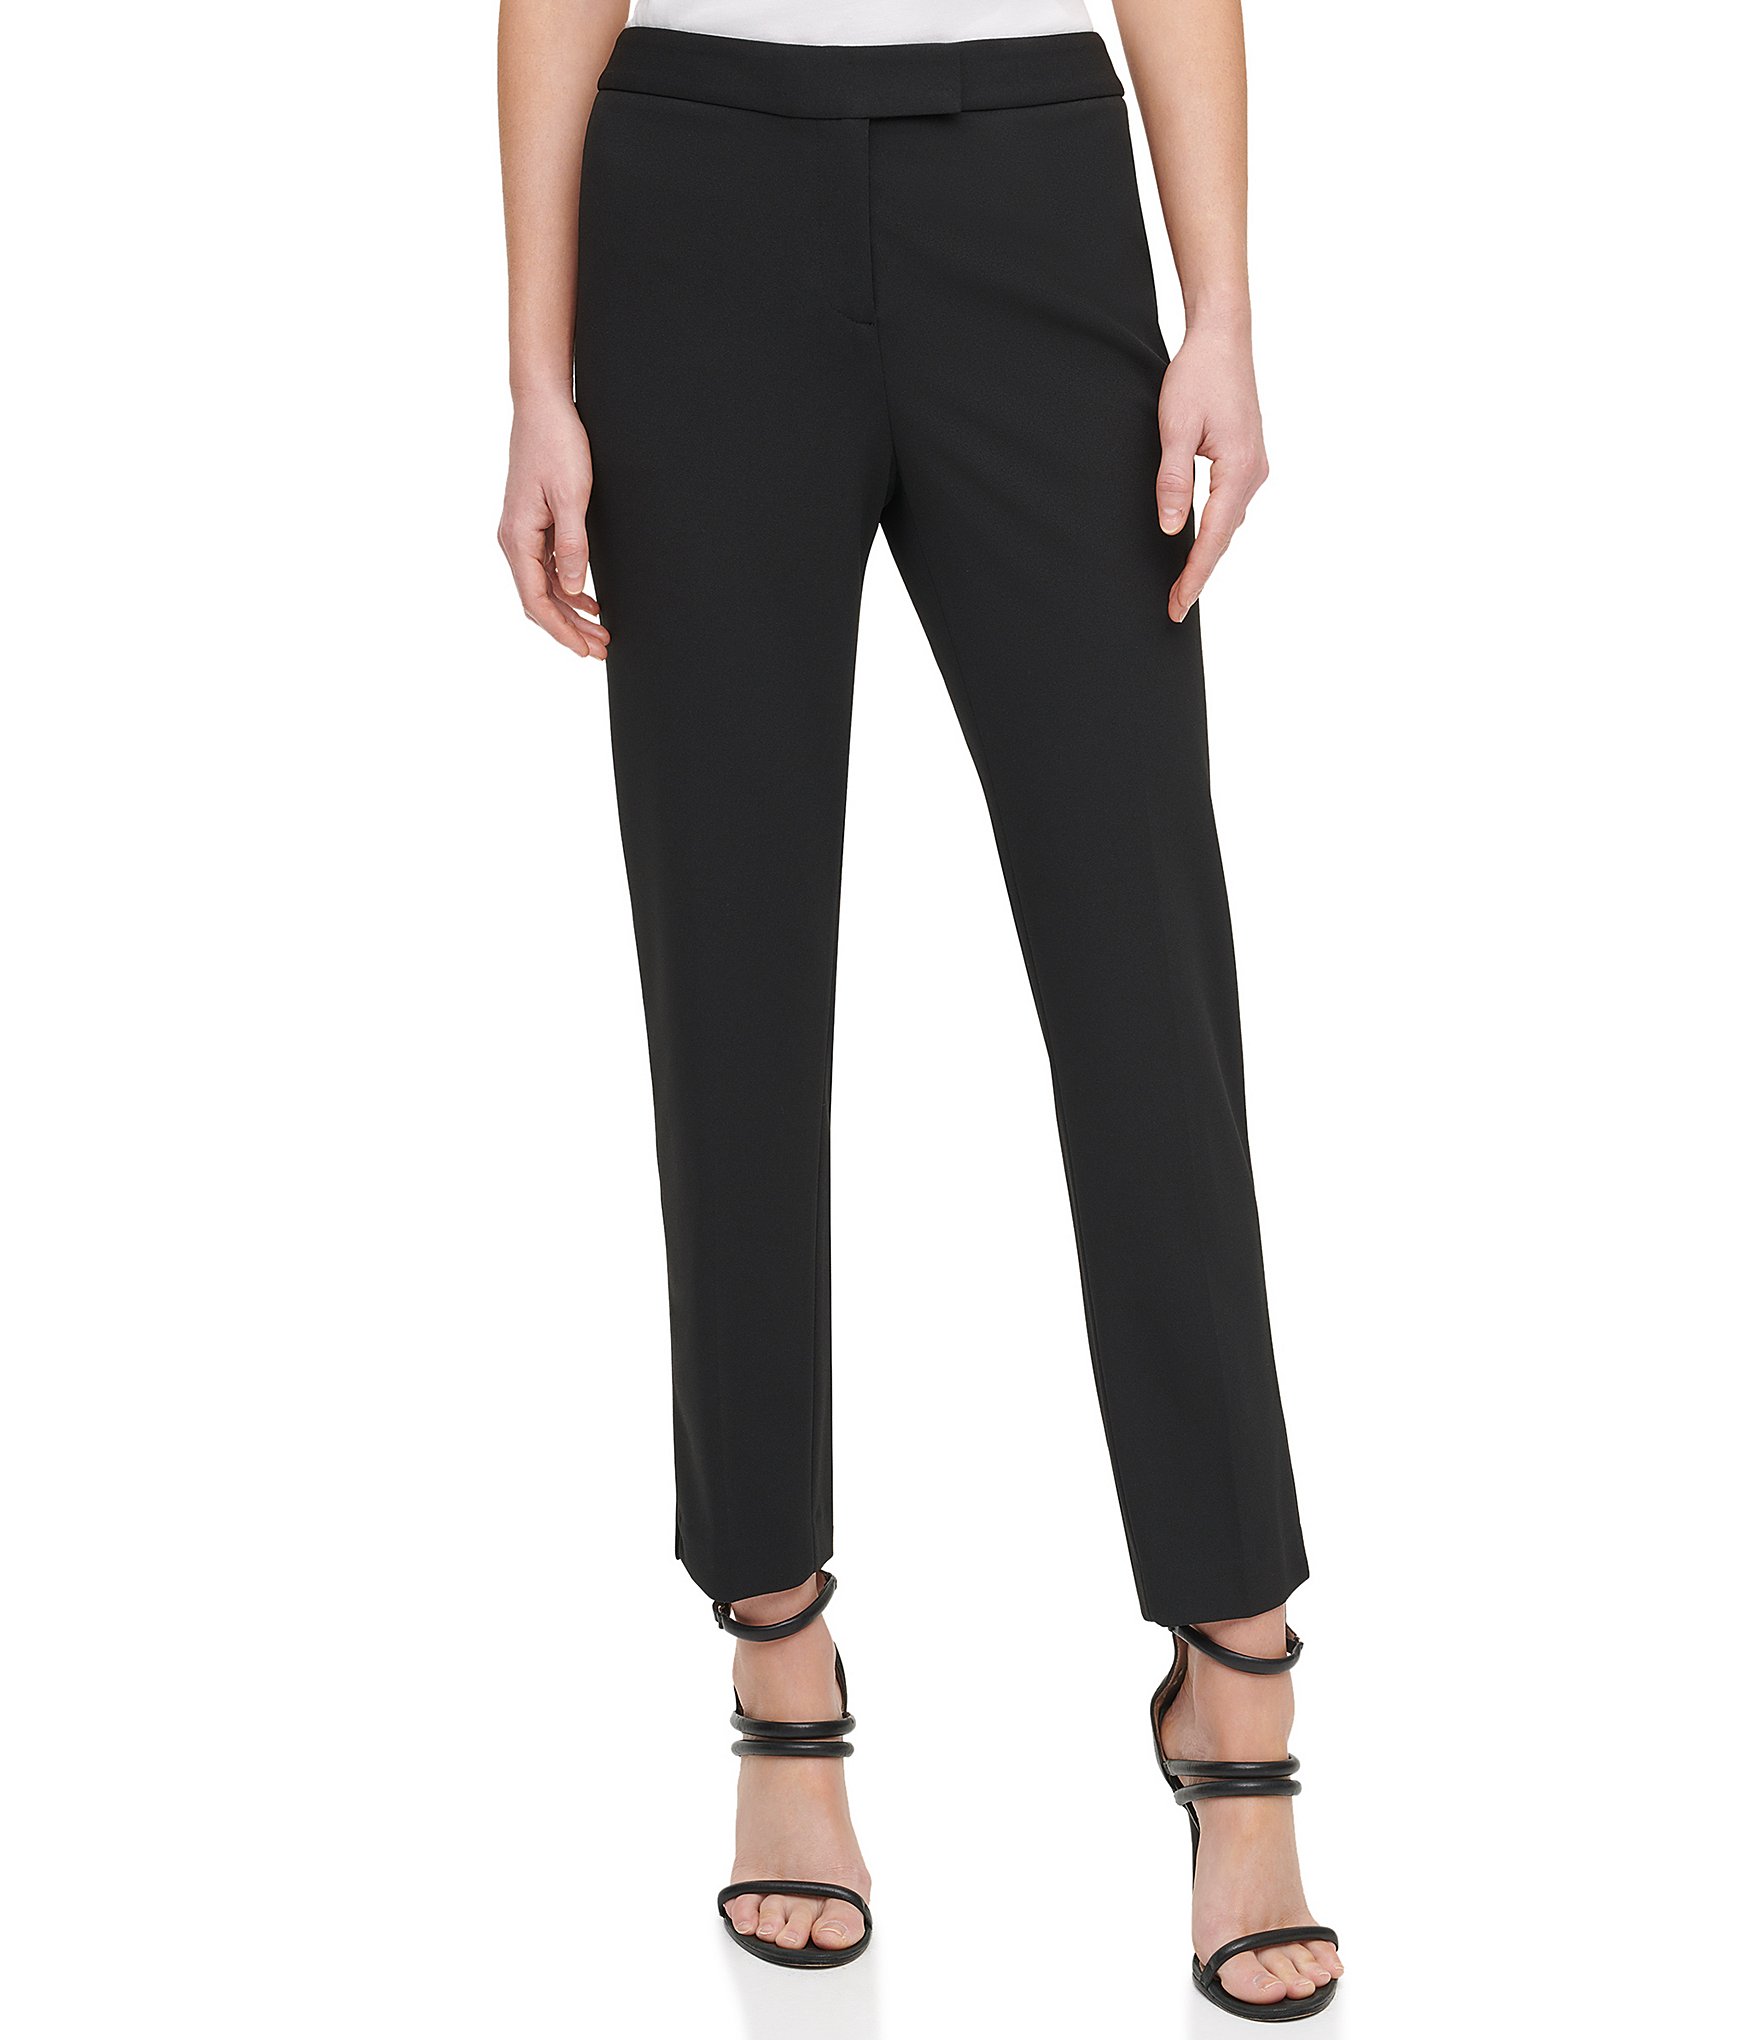 DKNY NWOT High Waisted Tie Waist Pants Ankle Length Black Size 4 NEW $99 -  $29 - From Laura